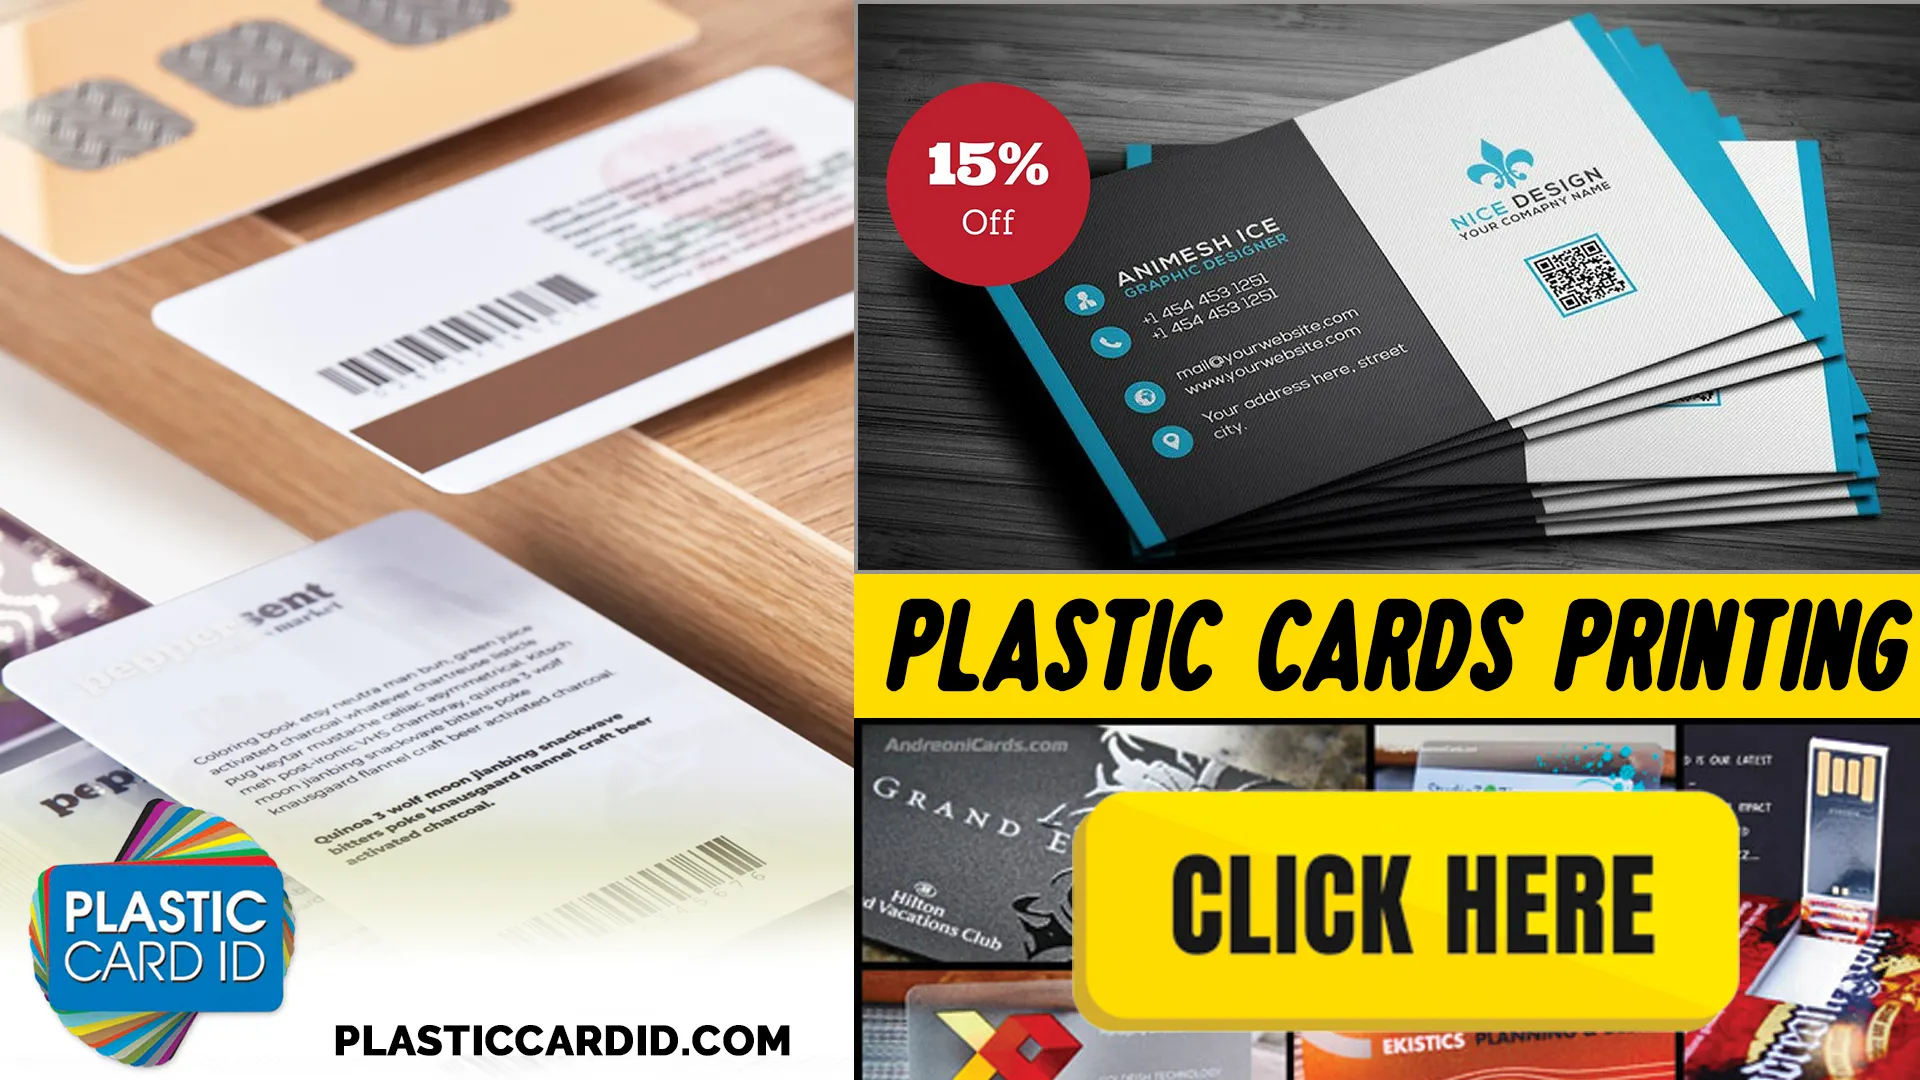 Security Features and Innovations in Card Printing Technology